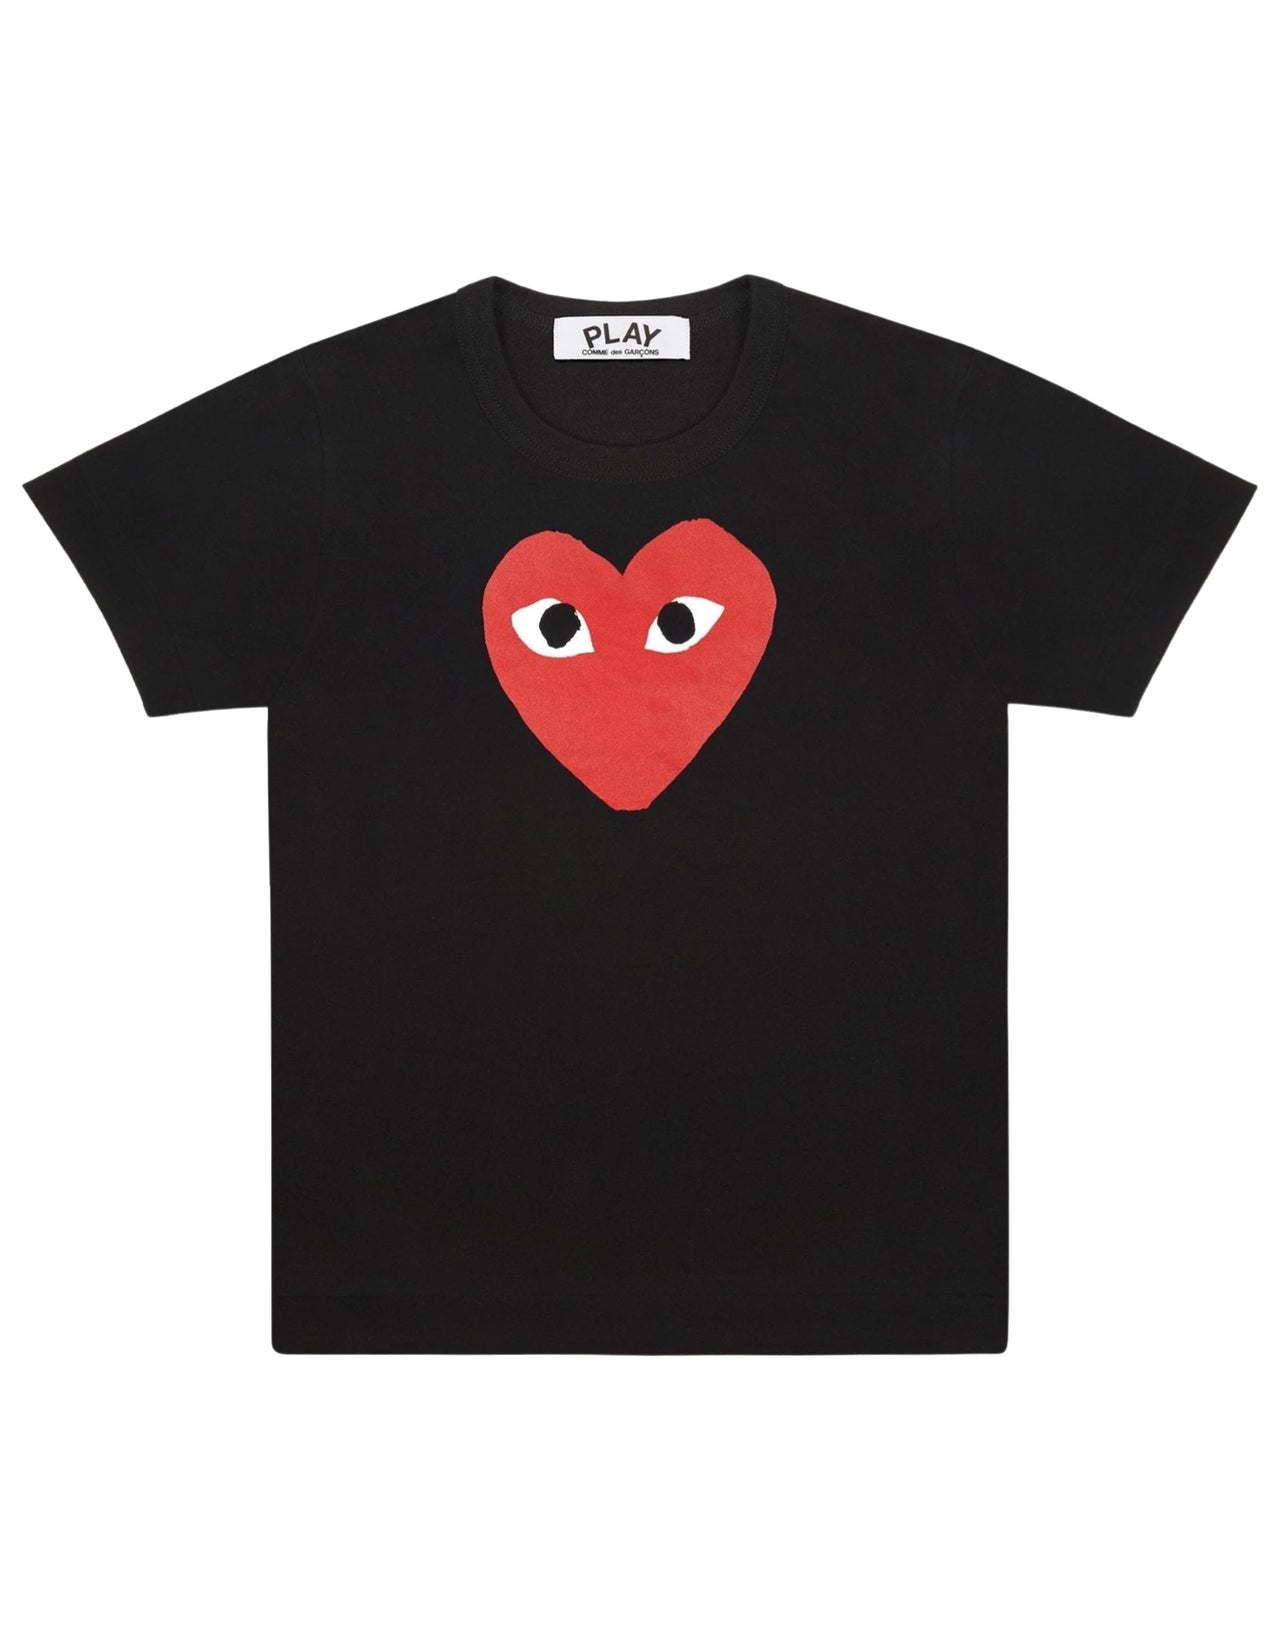 CDG PLAY T-shirt con Cuore Rosso Nera